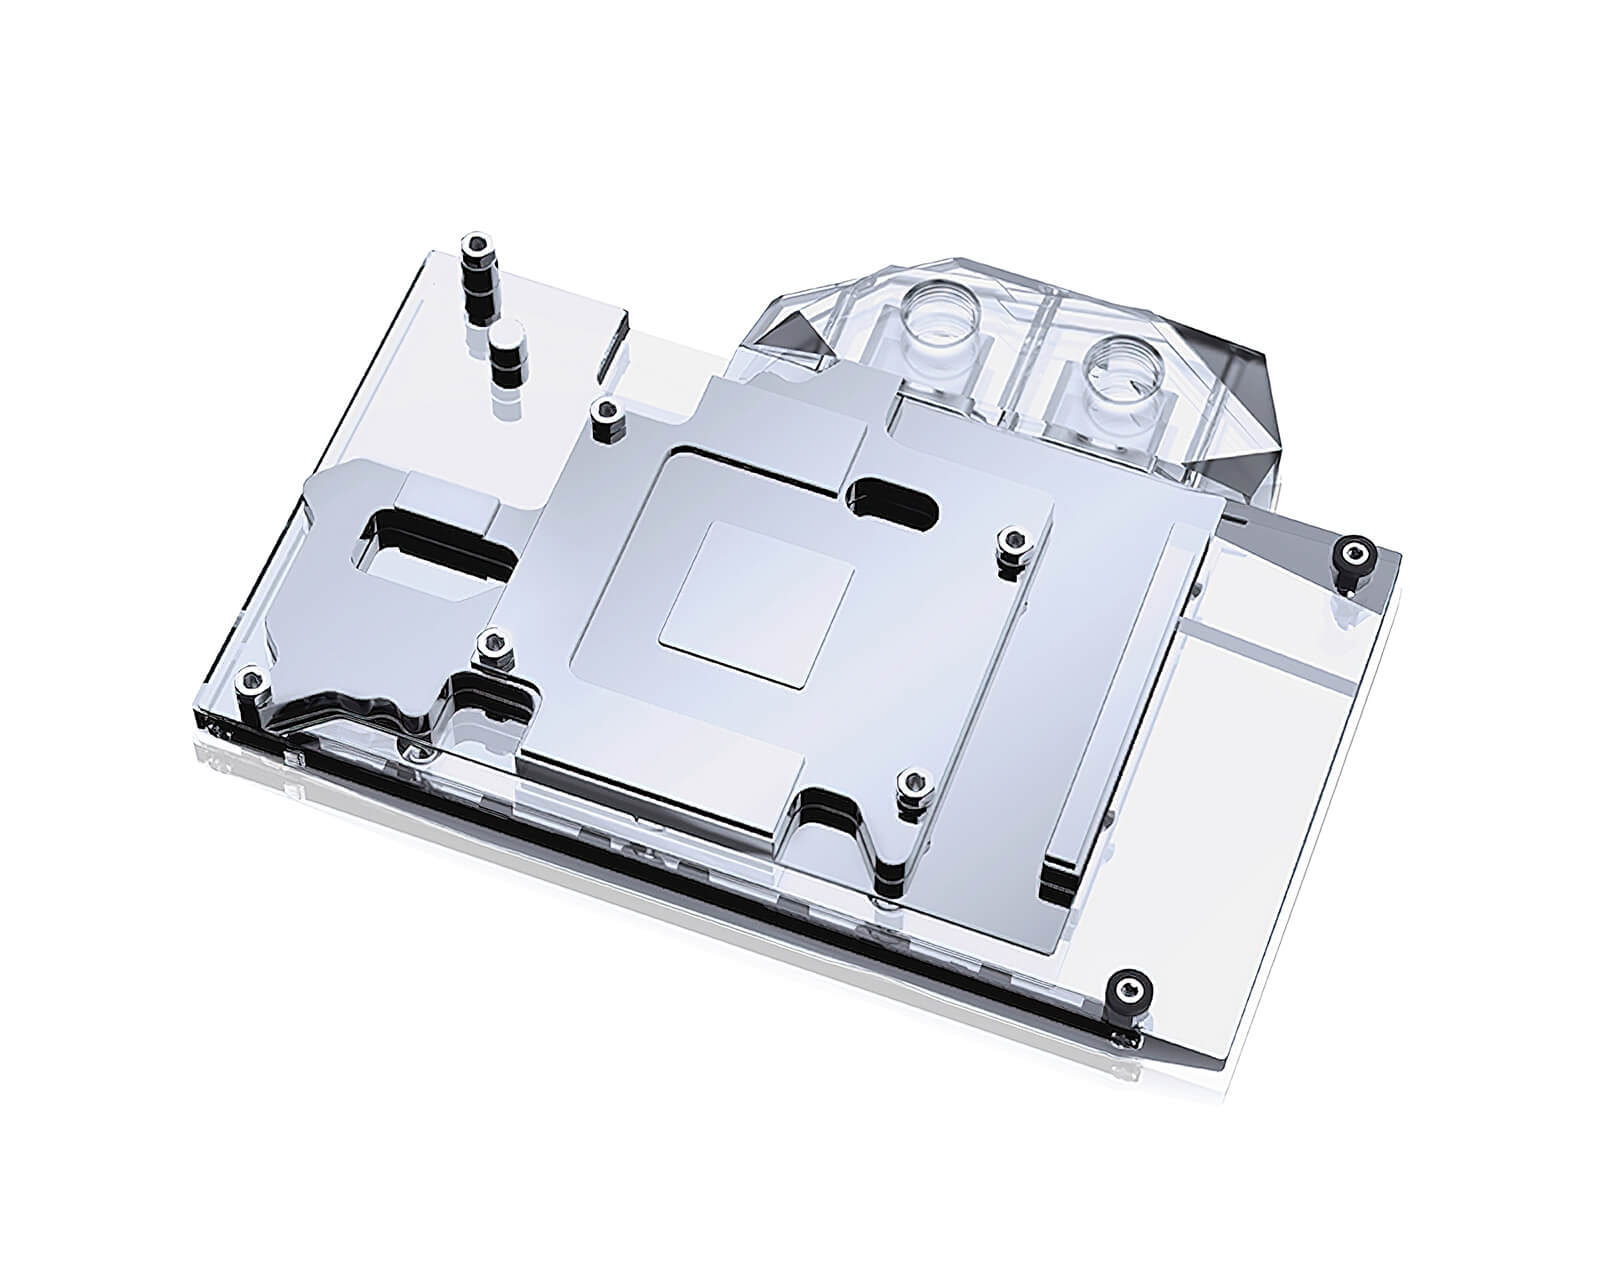 Bykski Full Coverage GPU Water Block and Backplate for RTX 3060Ti/3070 Founders Edition (N-RTX3070FE-X) - PrimoChill - KEEPING IT COOL